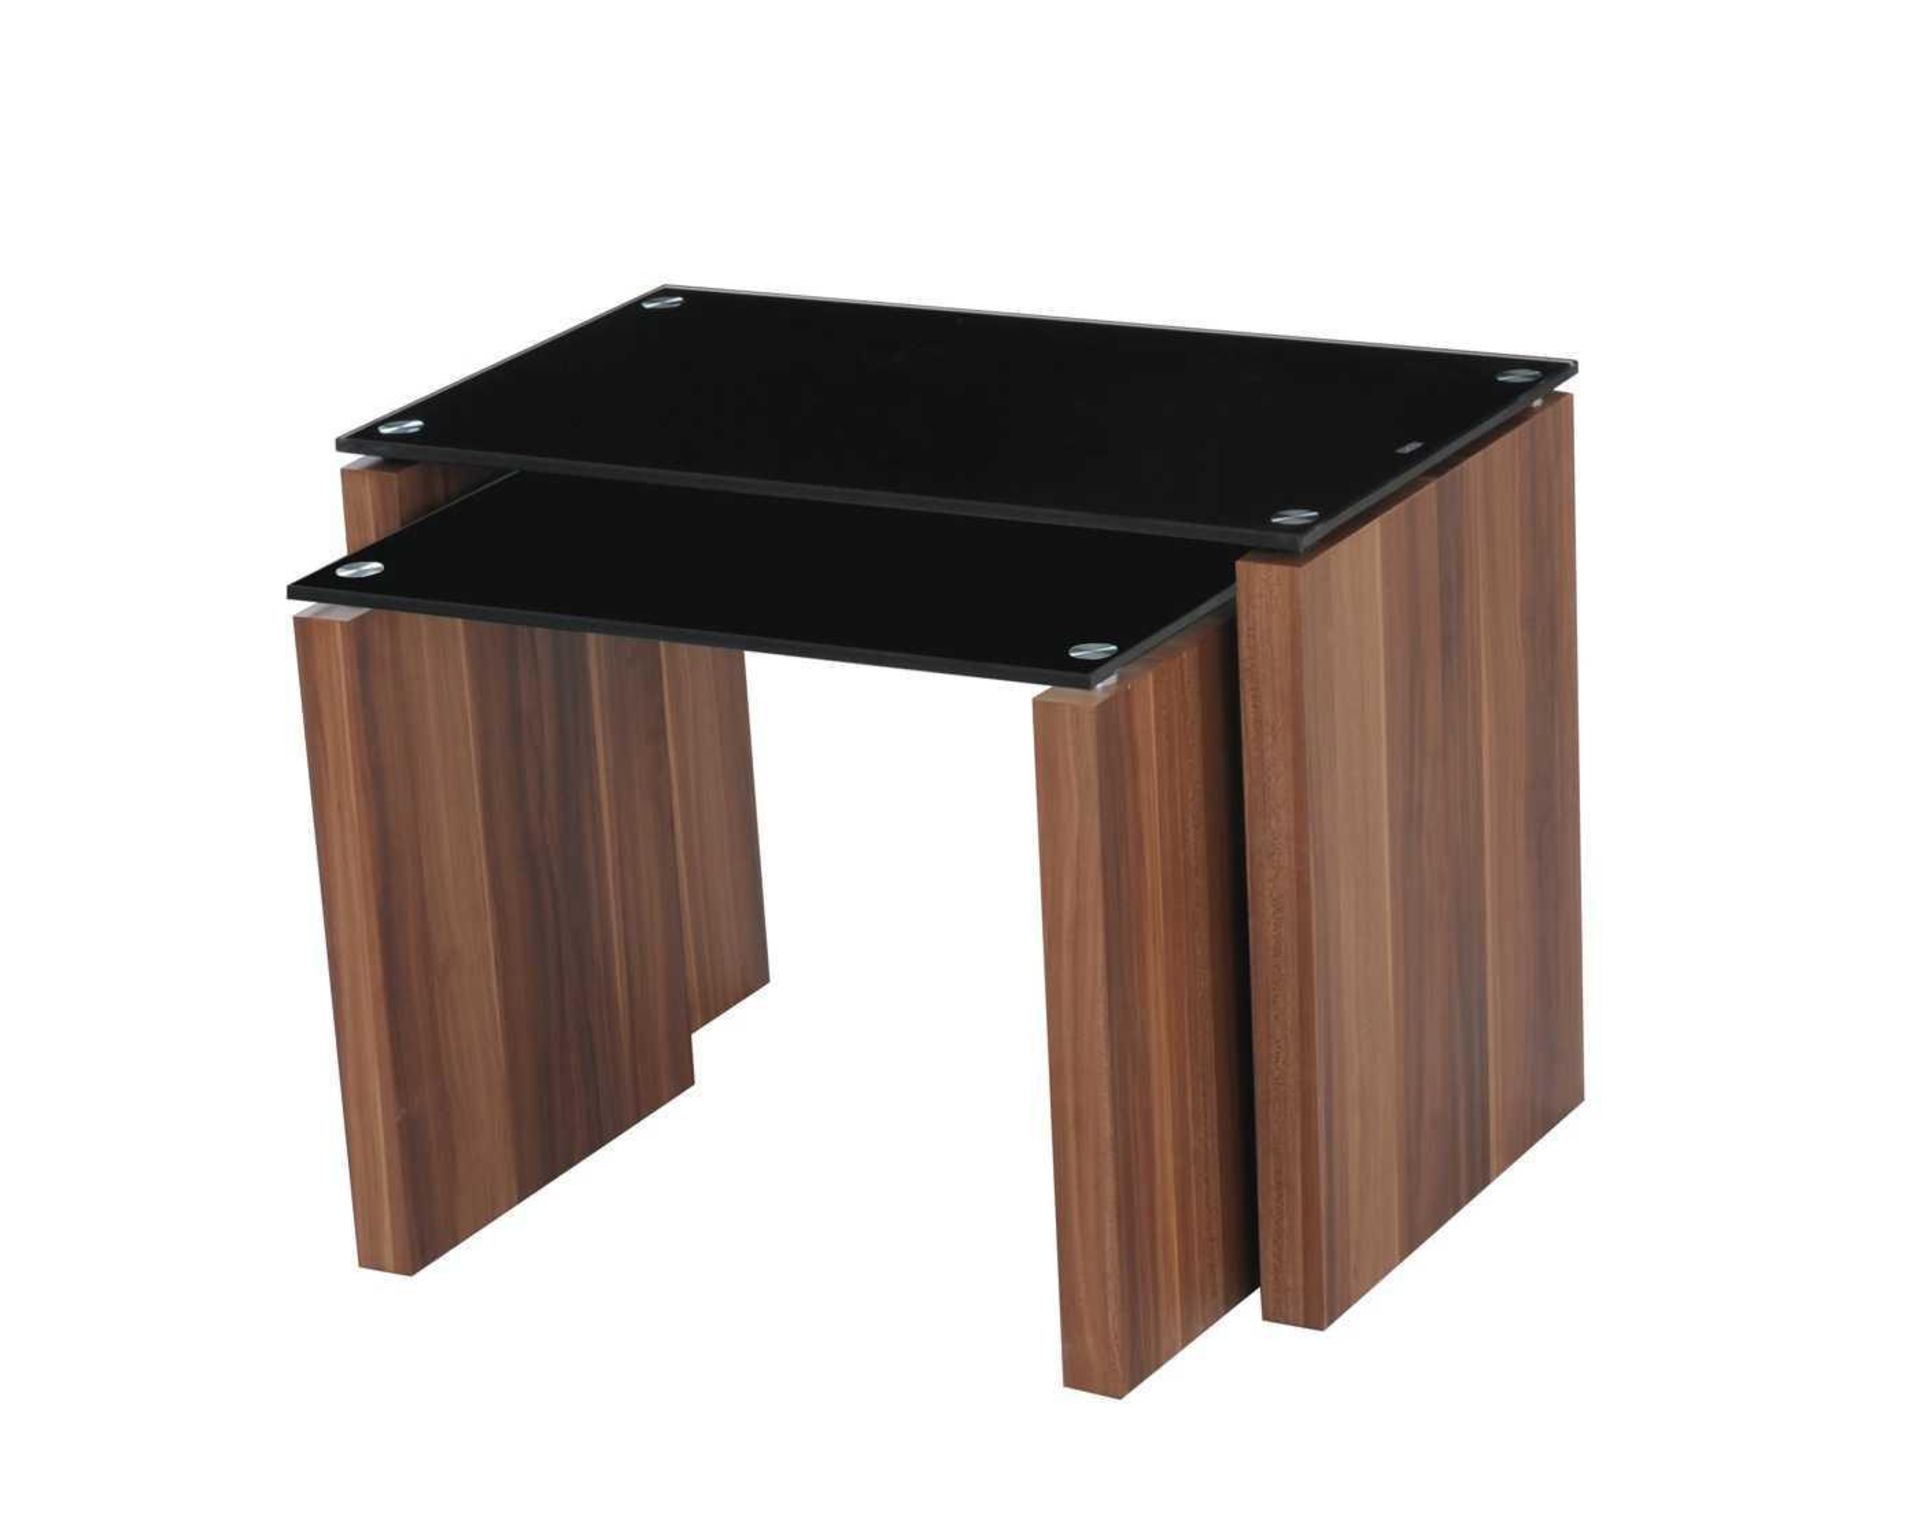 RRP £240 - Boxed 'Atlanta' Nest Of Tables In Walnut Finish With Black Glass Top (Appraisals